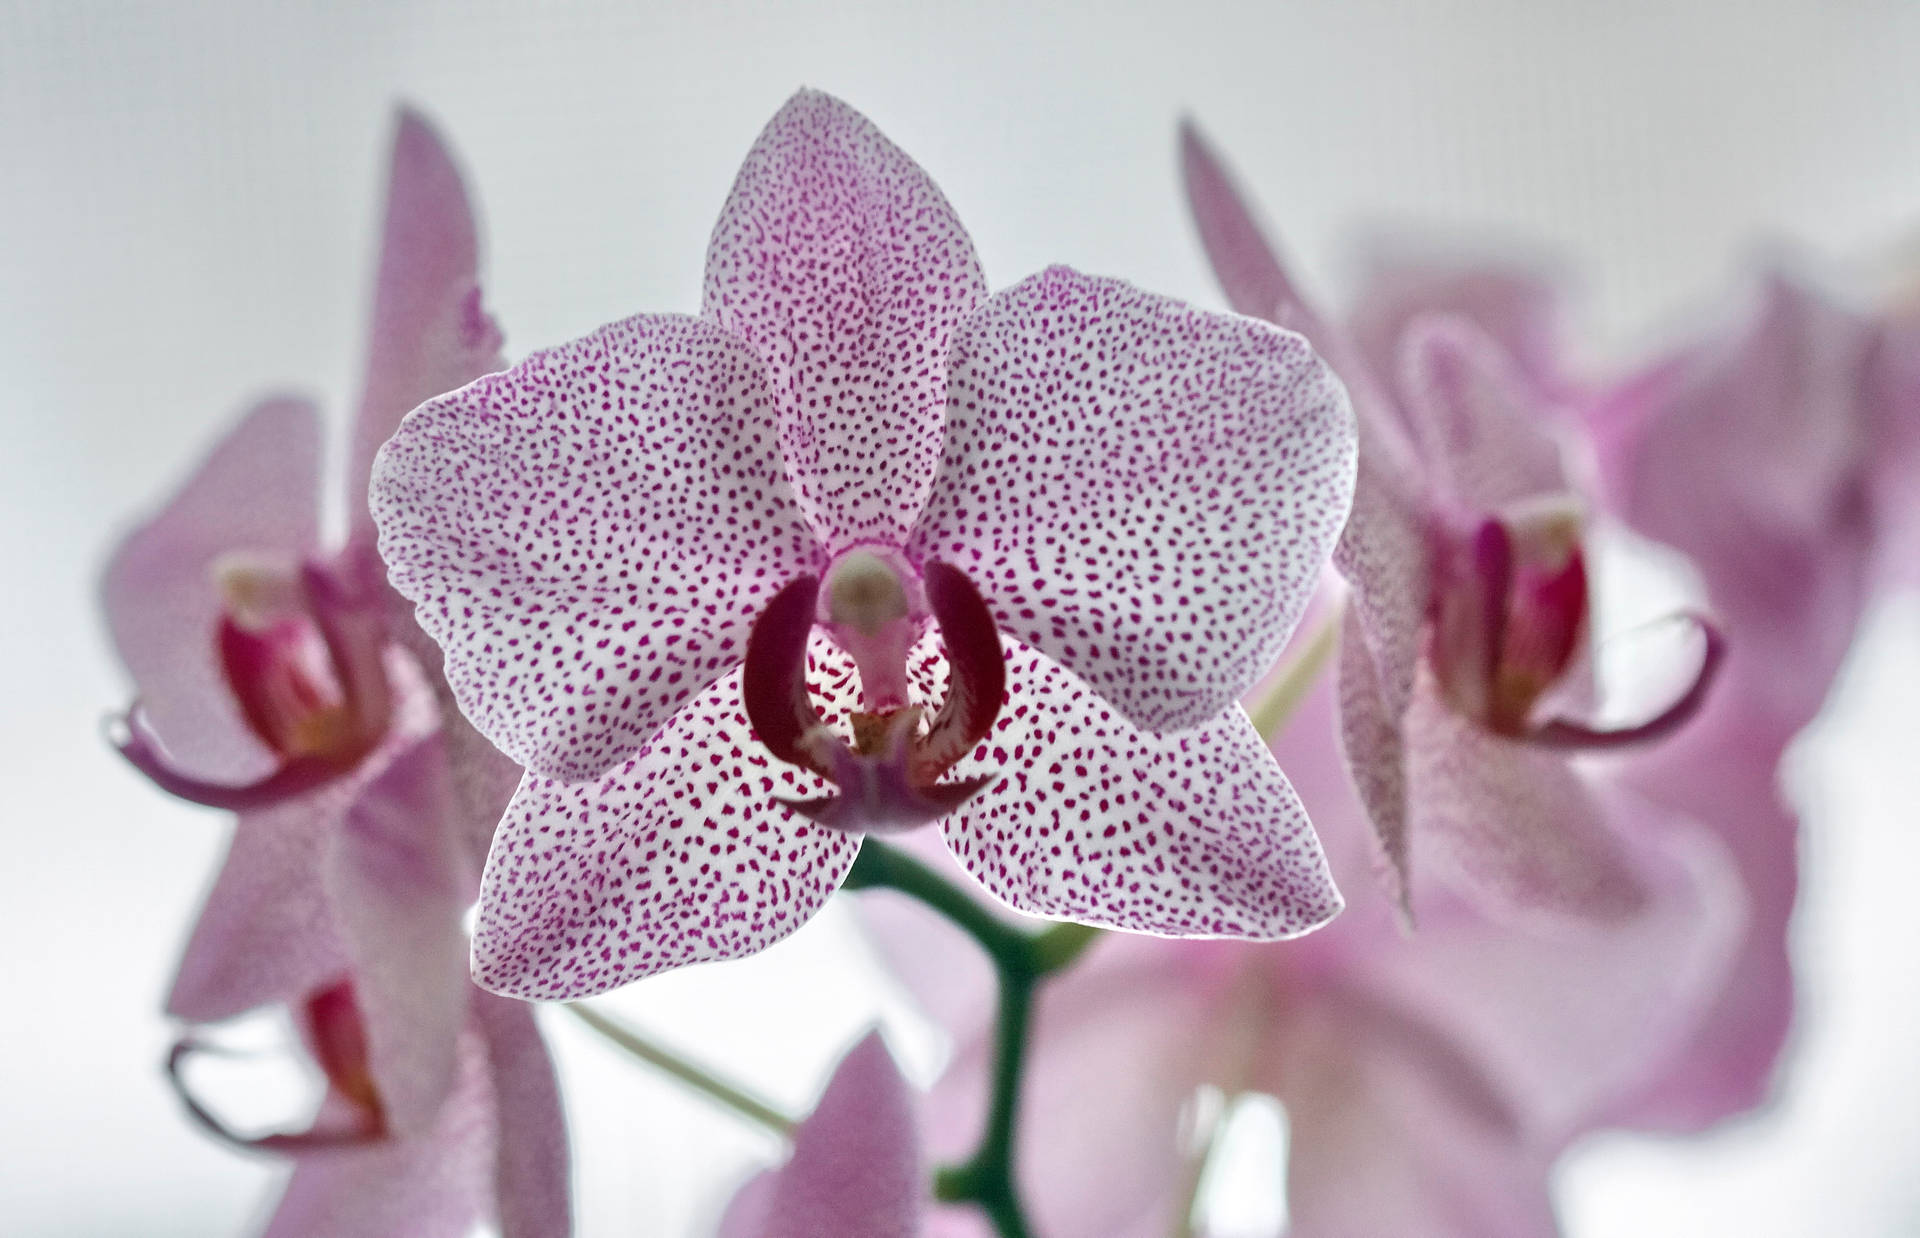 Caption: Magnificent White Orchid With Violet Spots Background